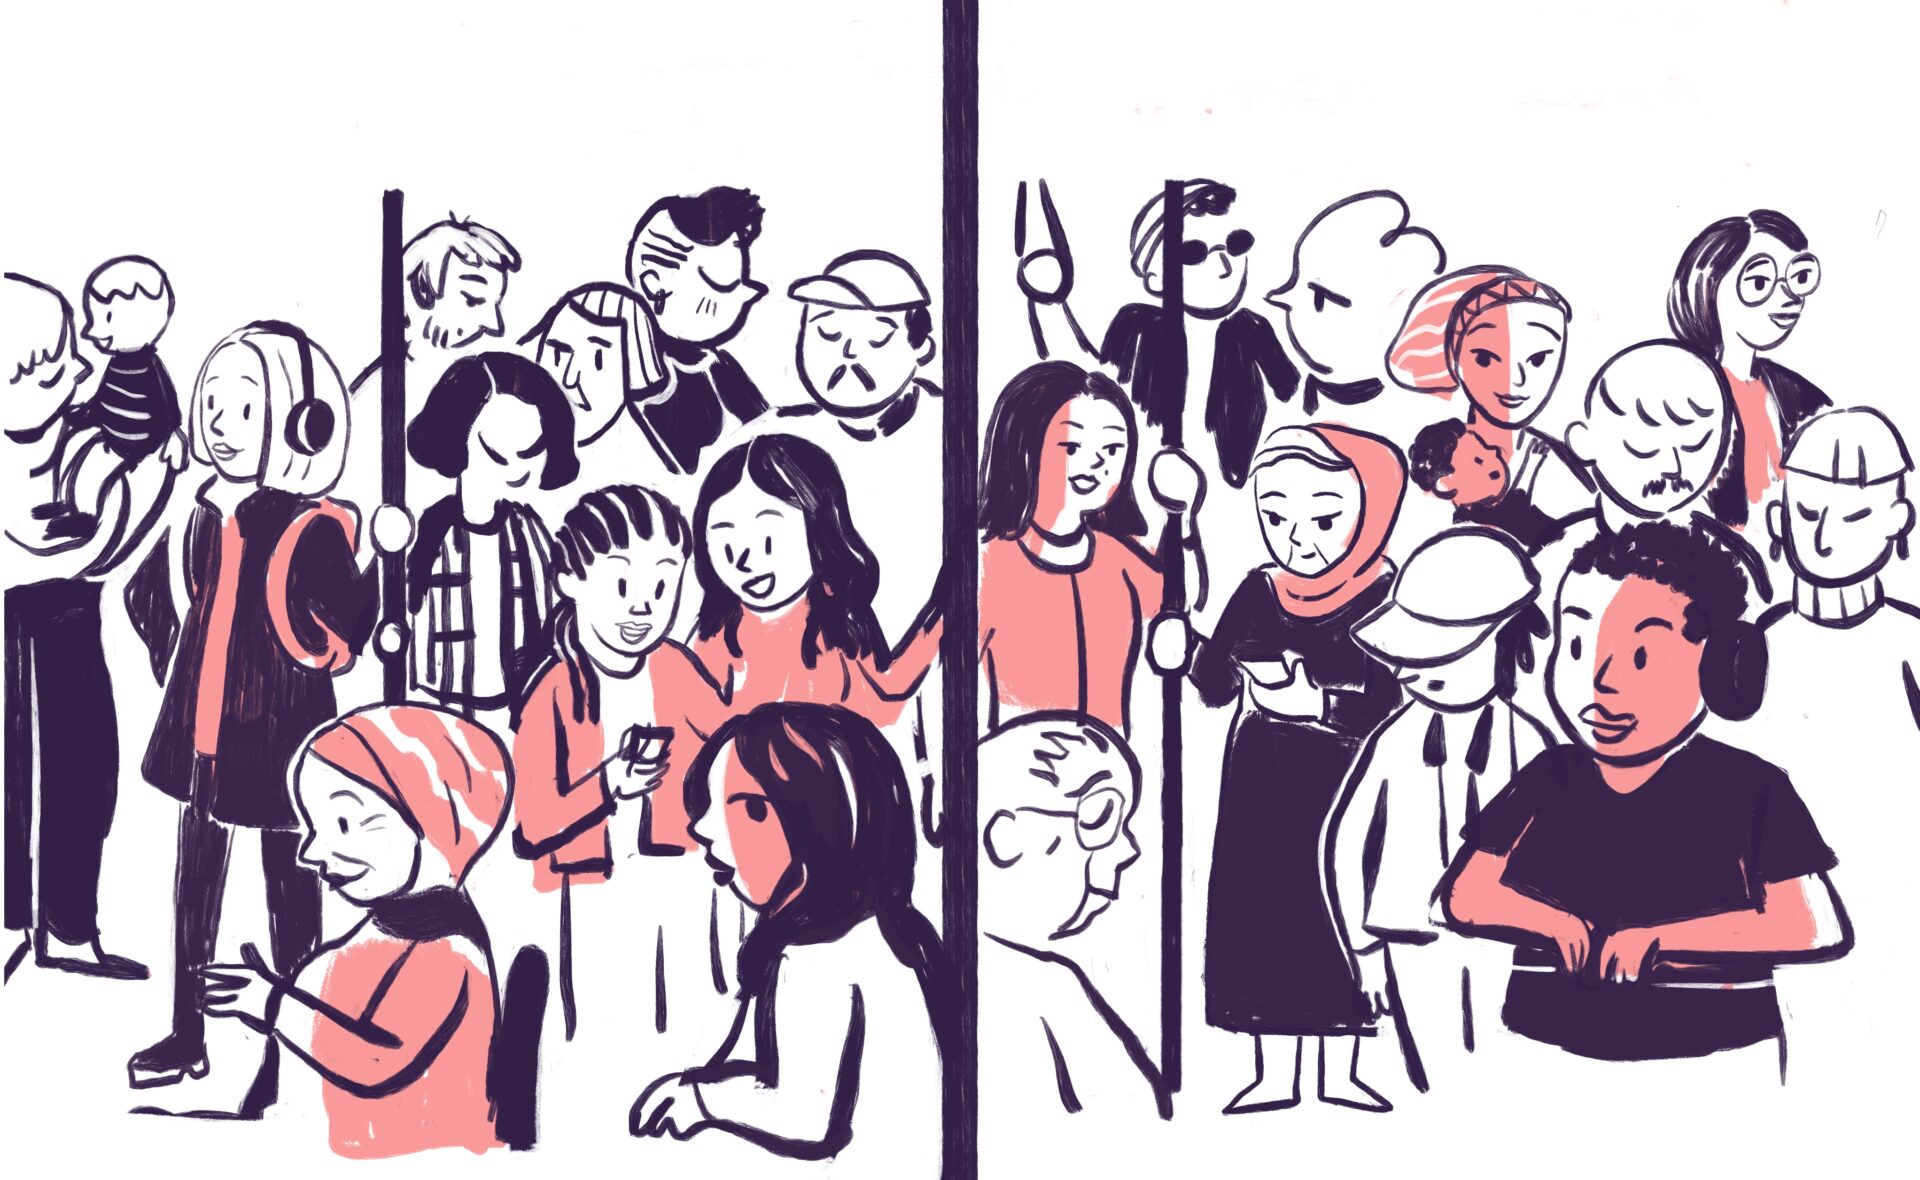 10fold Comics - stories against discrimination. 10 women talk about their experience